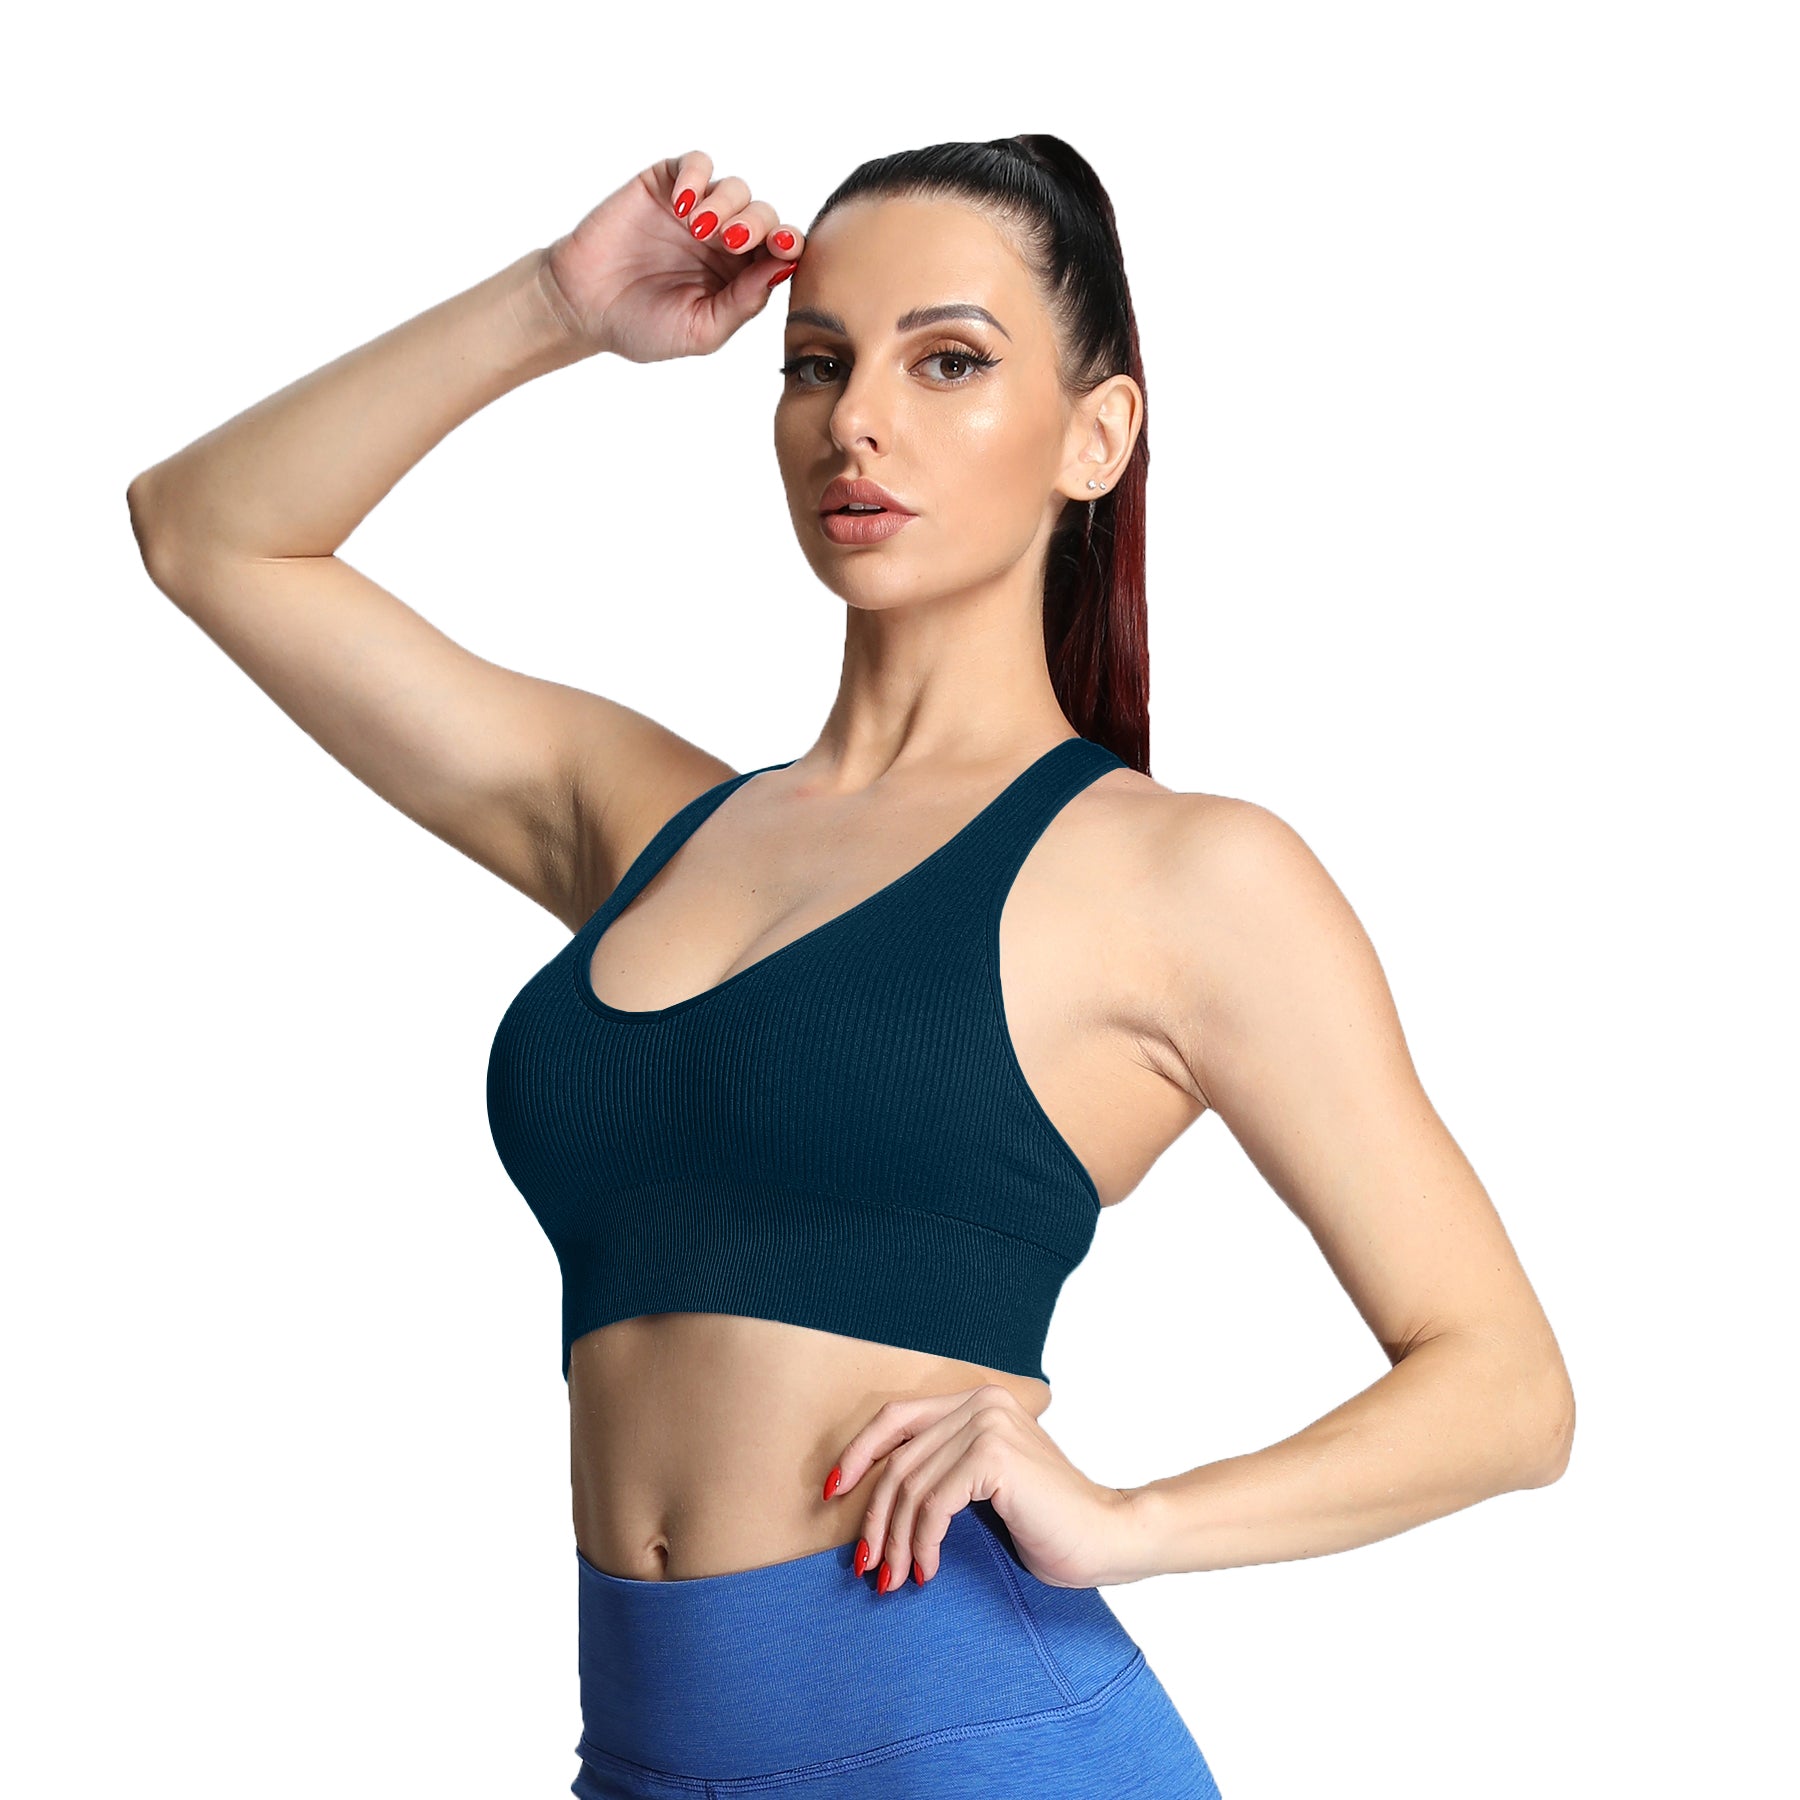 Aoxjox Sports Bra Tan - $18 (35% Off Retail) - From Saleen